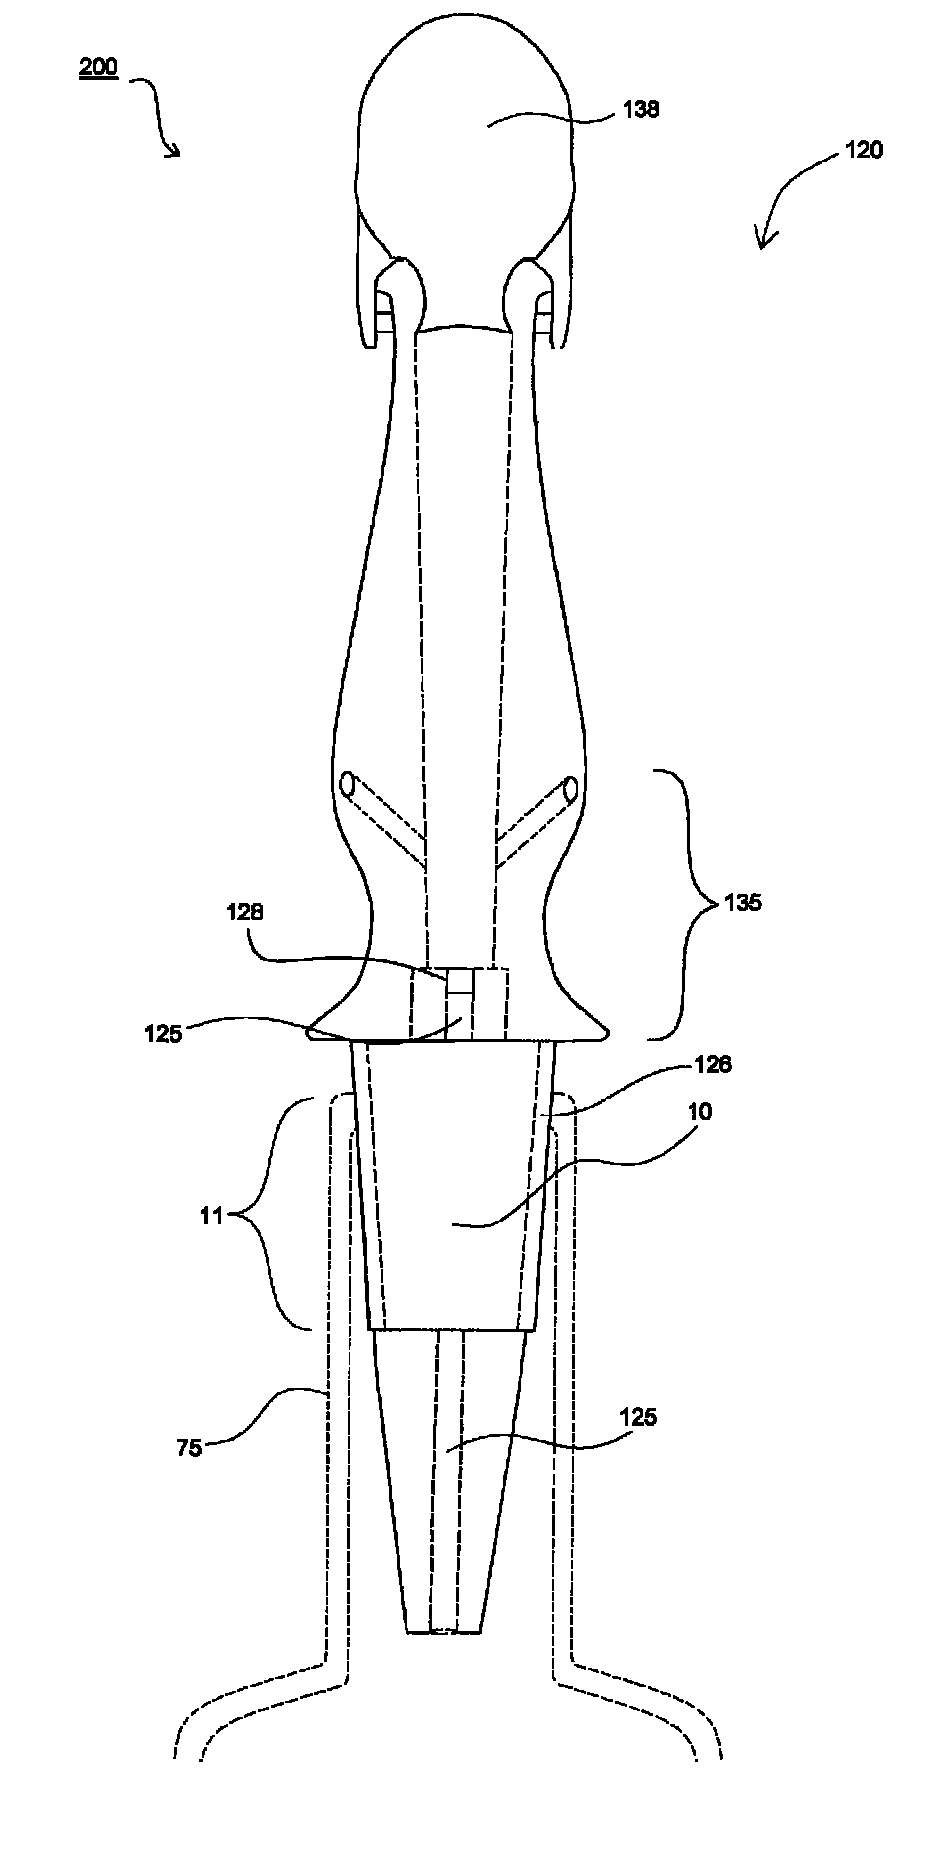 Venturi apparatus for pouring and aereating beverages